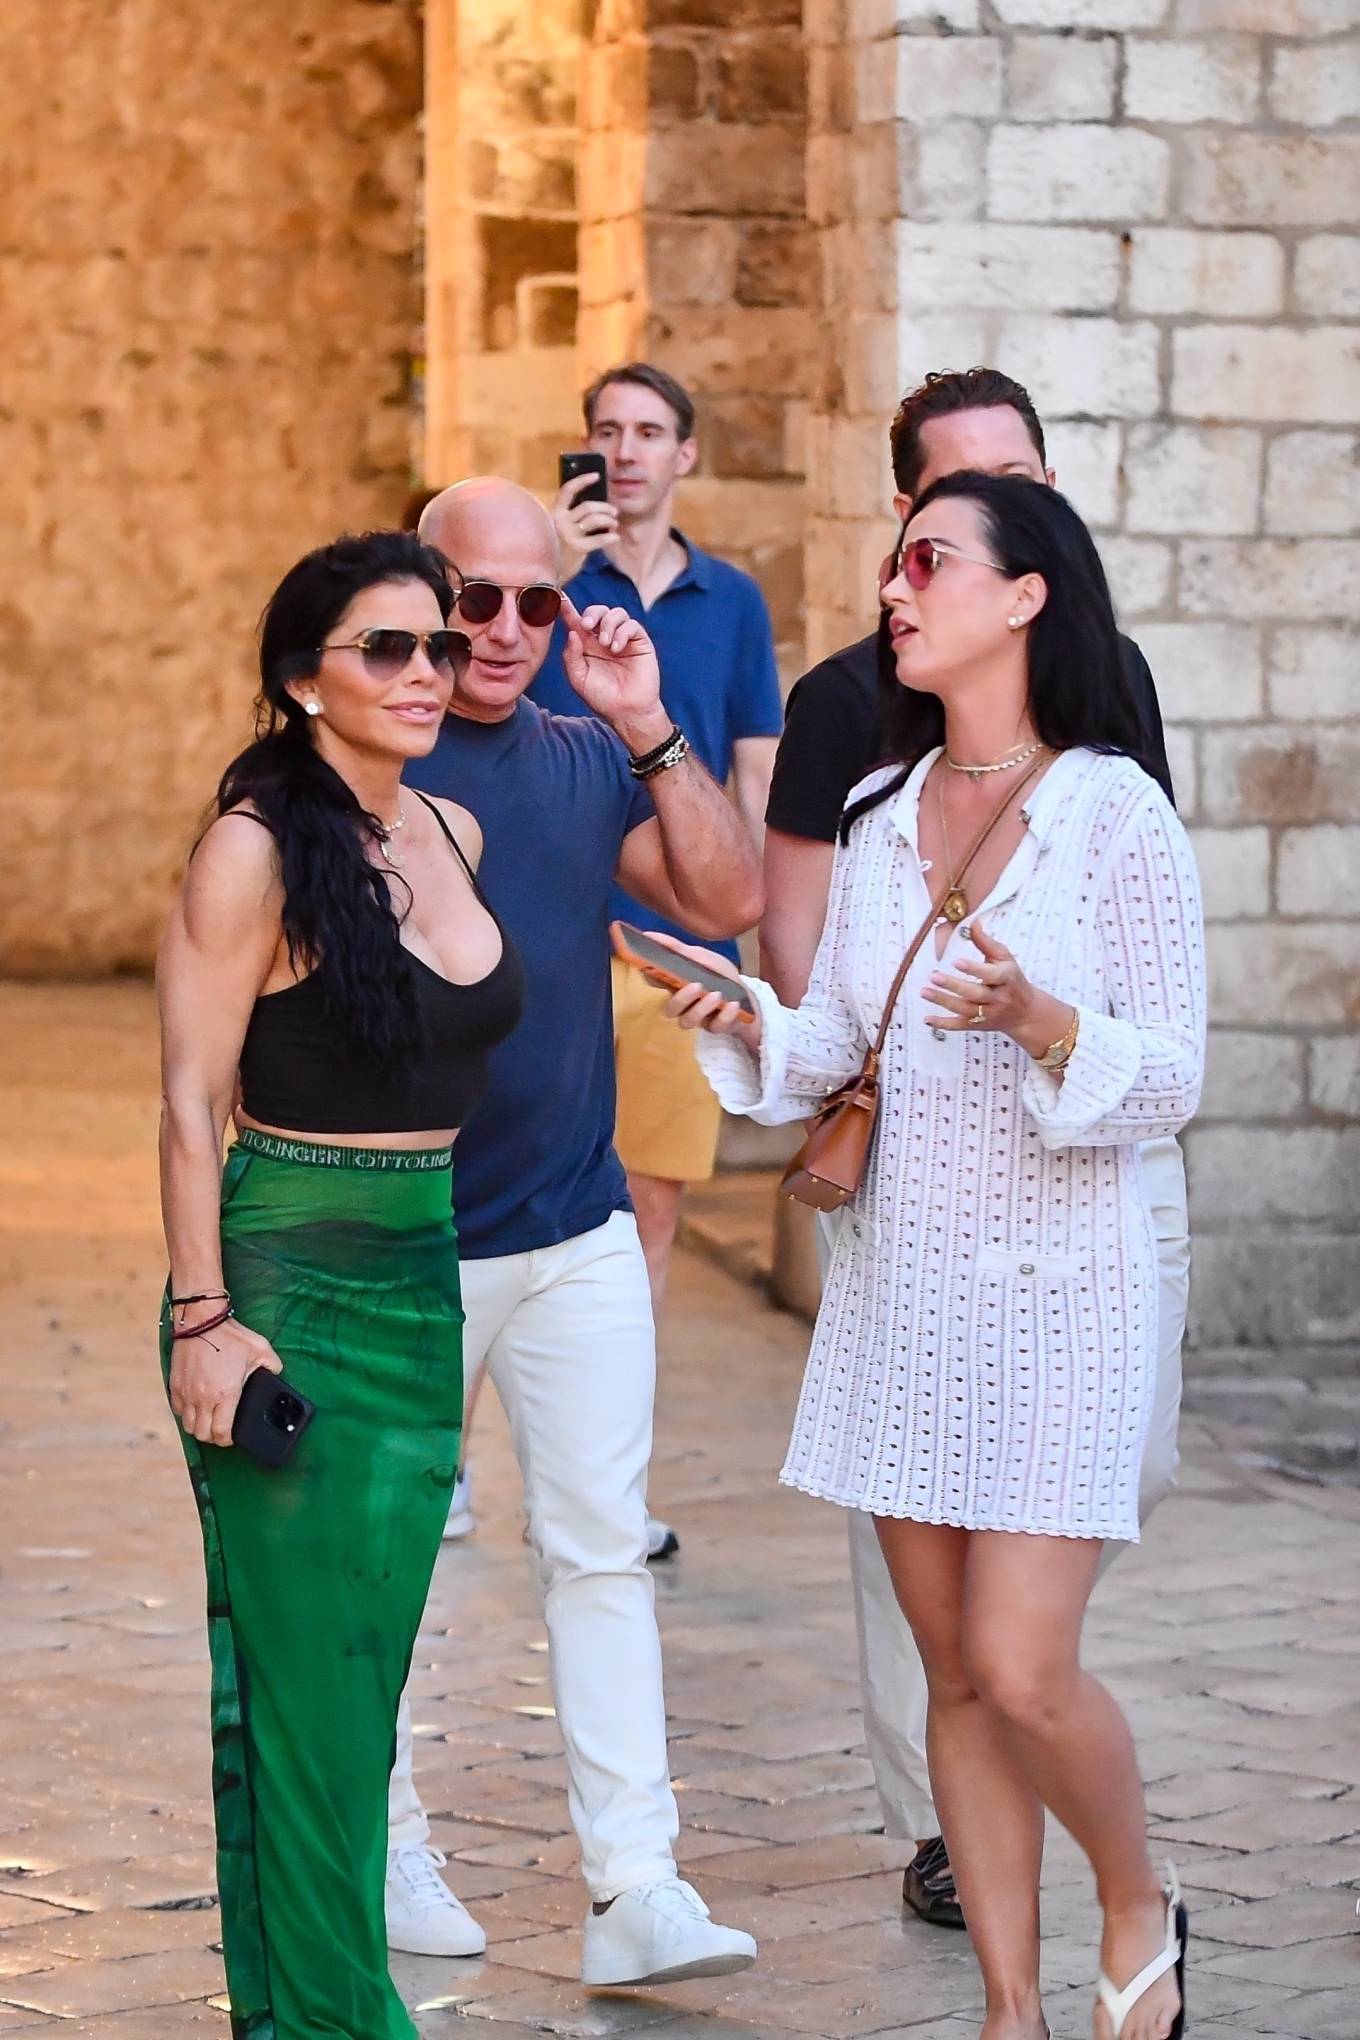 Katy Perry - And Lauren Sanchez Were are enjoying a leisurely walk in Dubrovnik